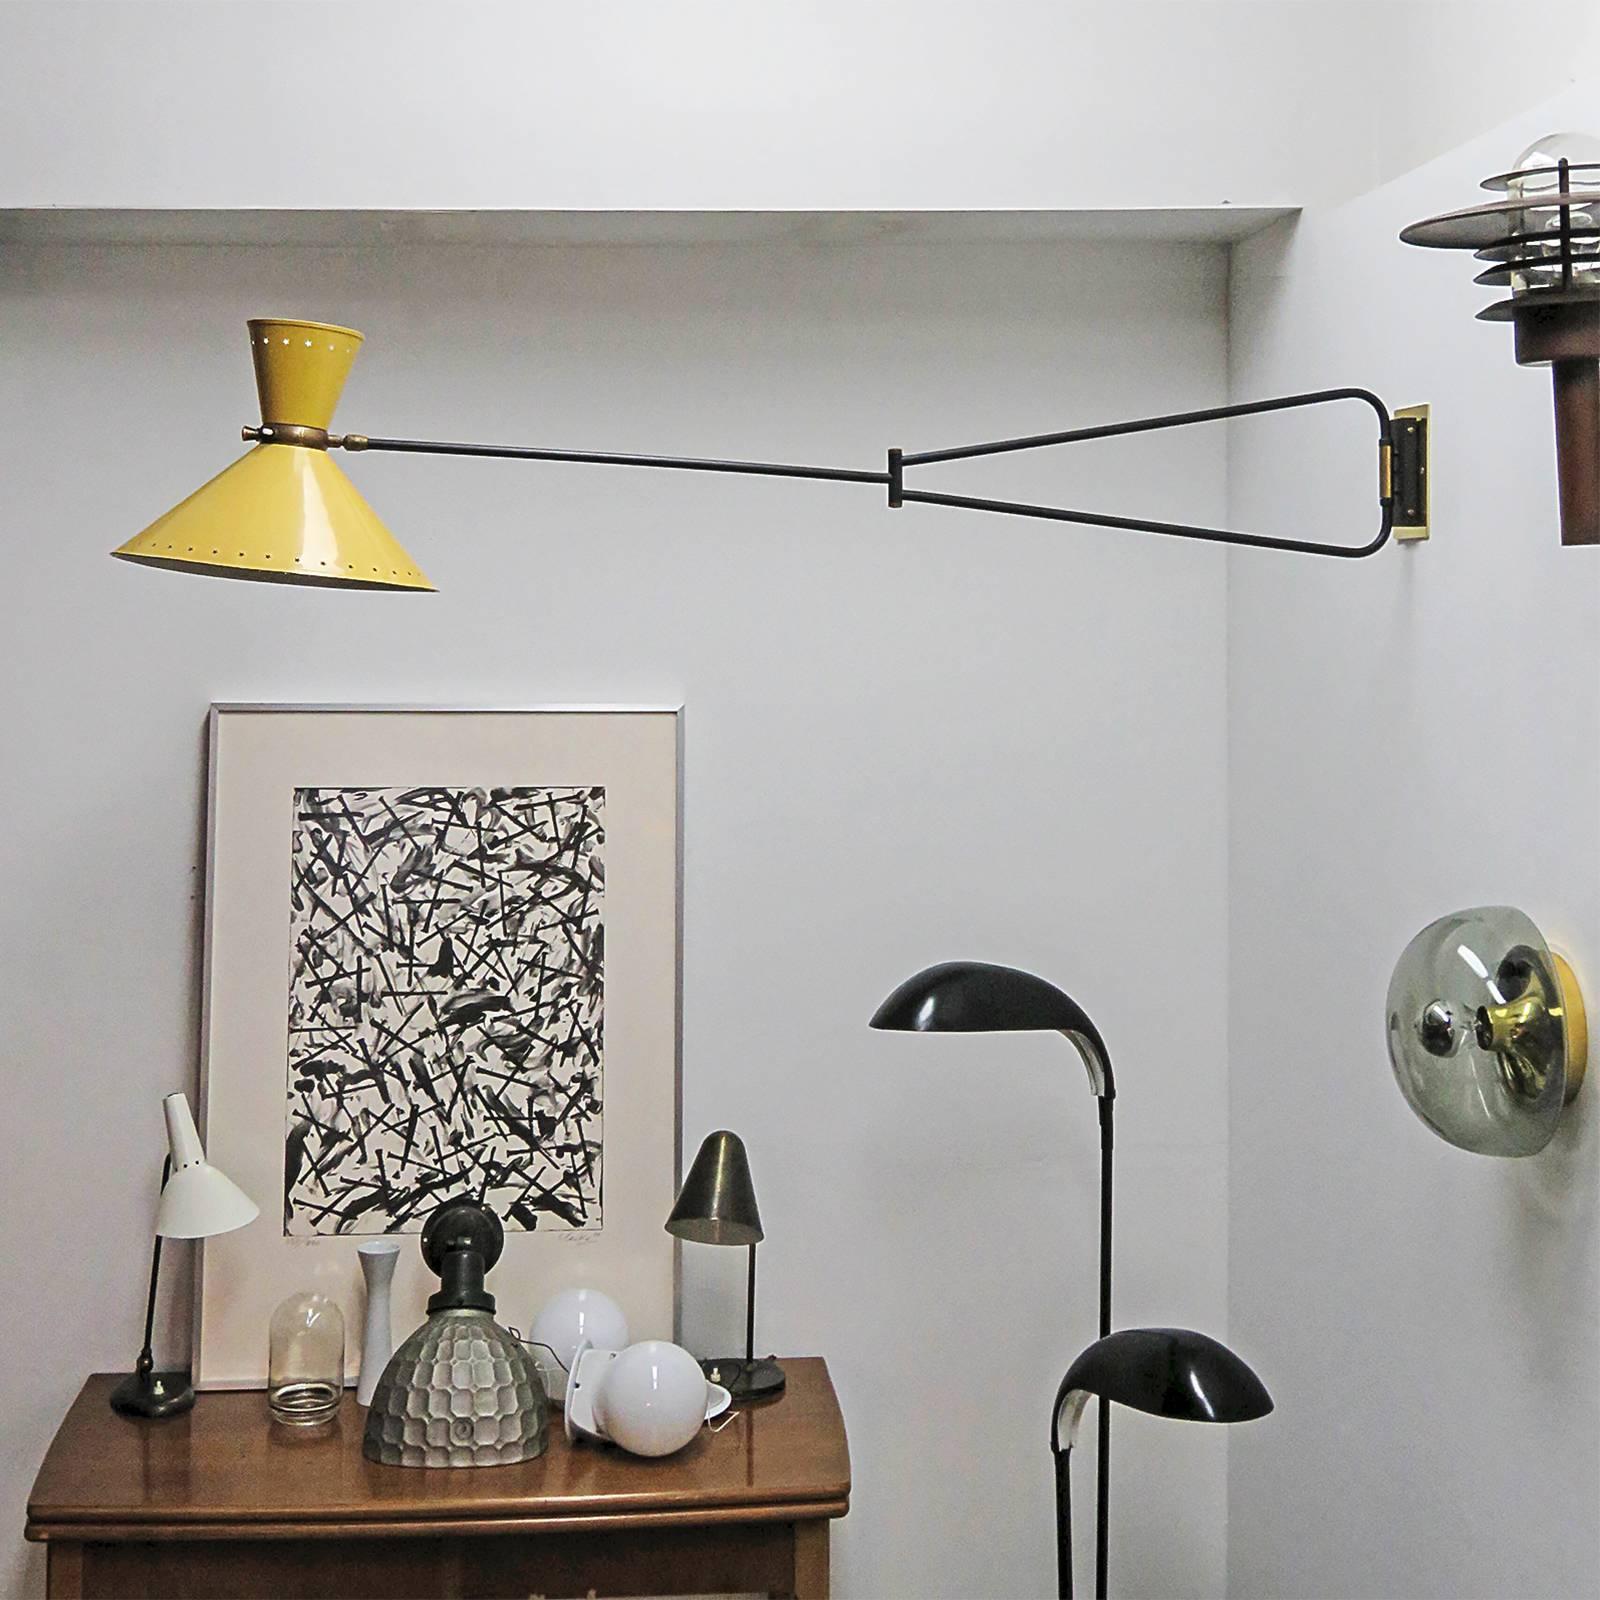 stunning large-scale articulate swing arm wall light by Rene Mathieu for Lunel, double cone lamp shade in original yellow enamel with two light source (up/down) and individual on/off switches at the center of the shades, brass accent to the arm and